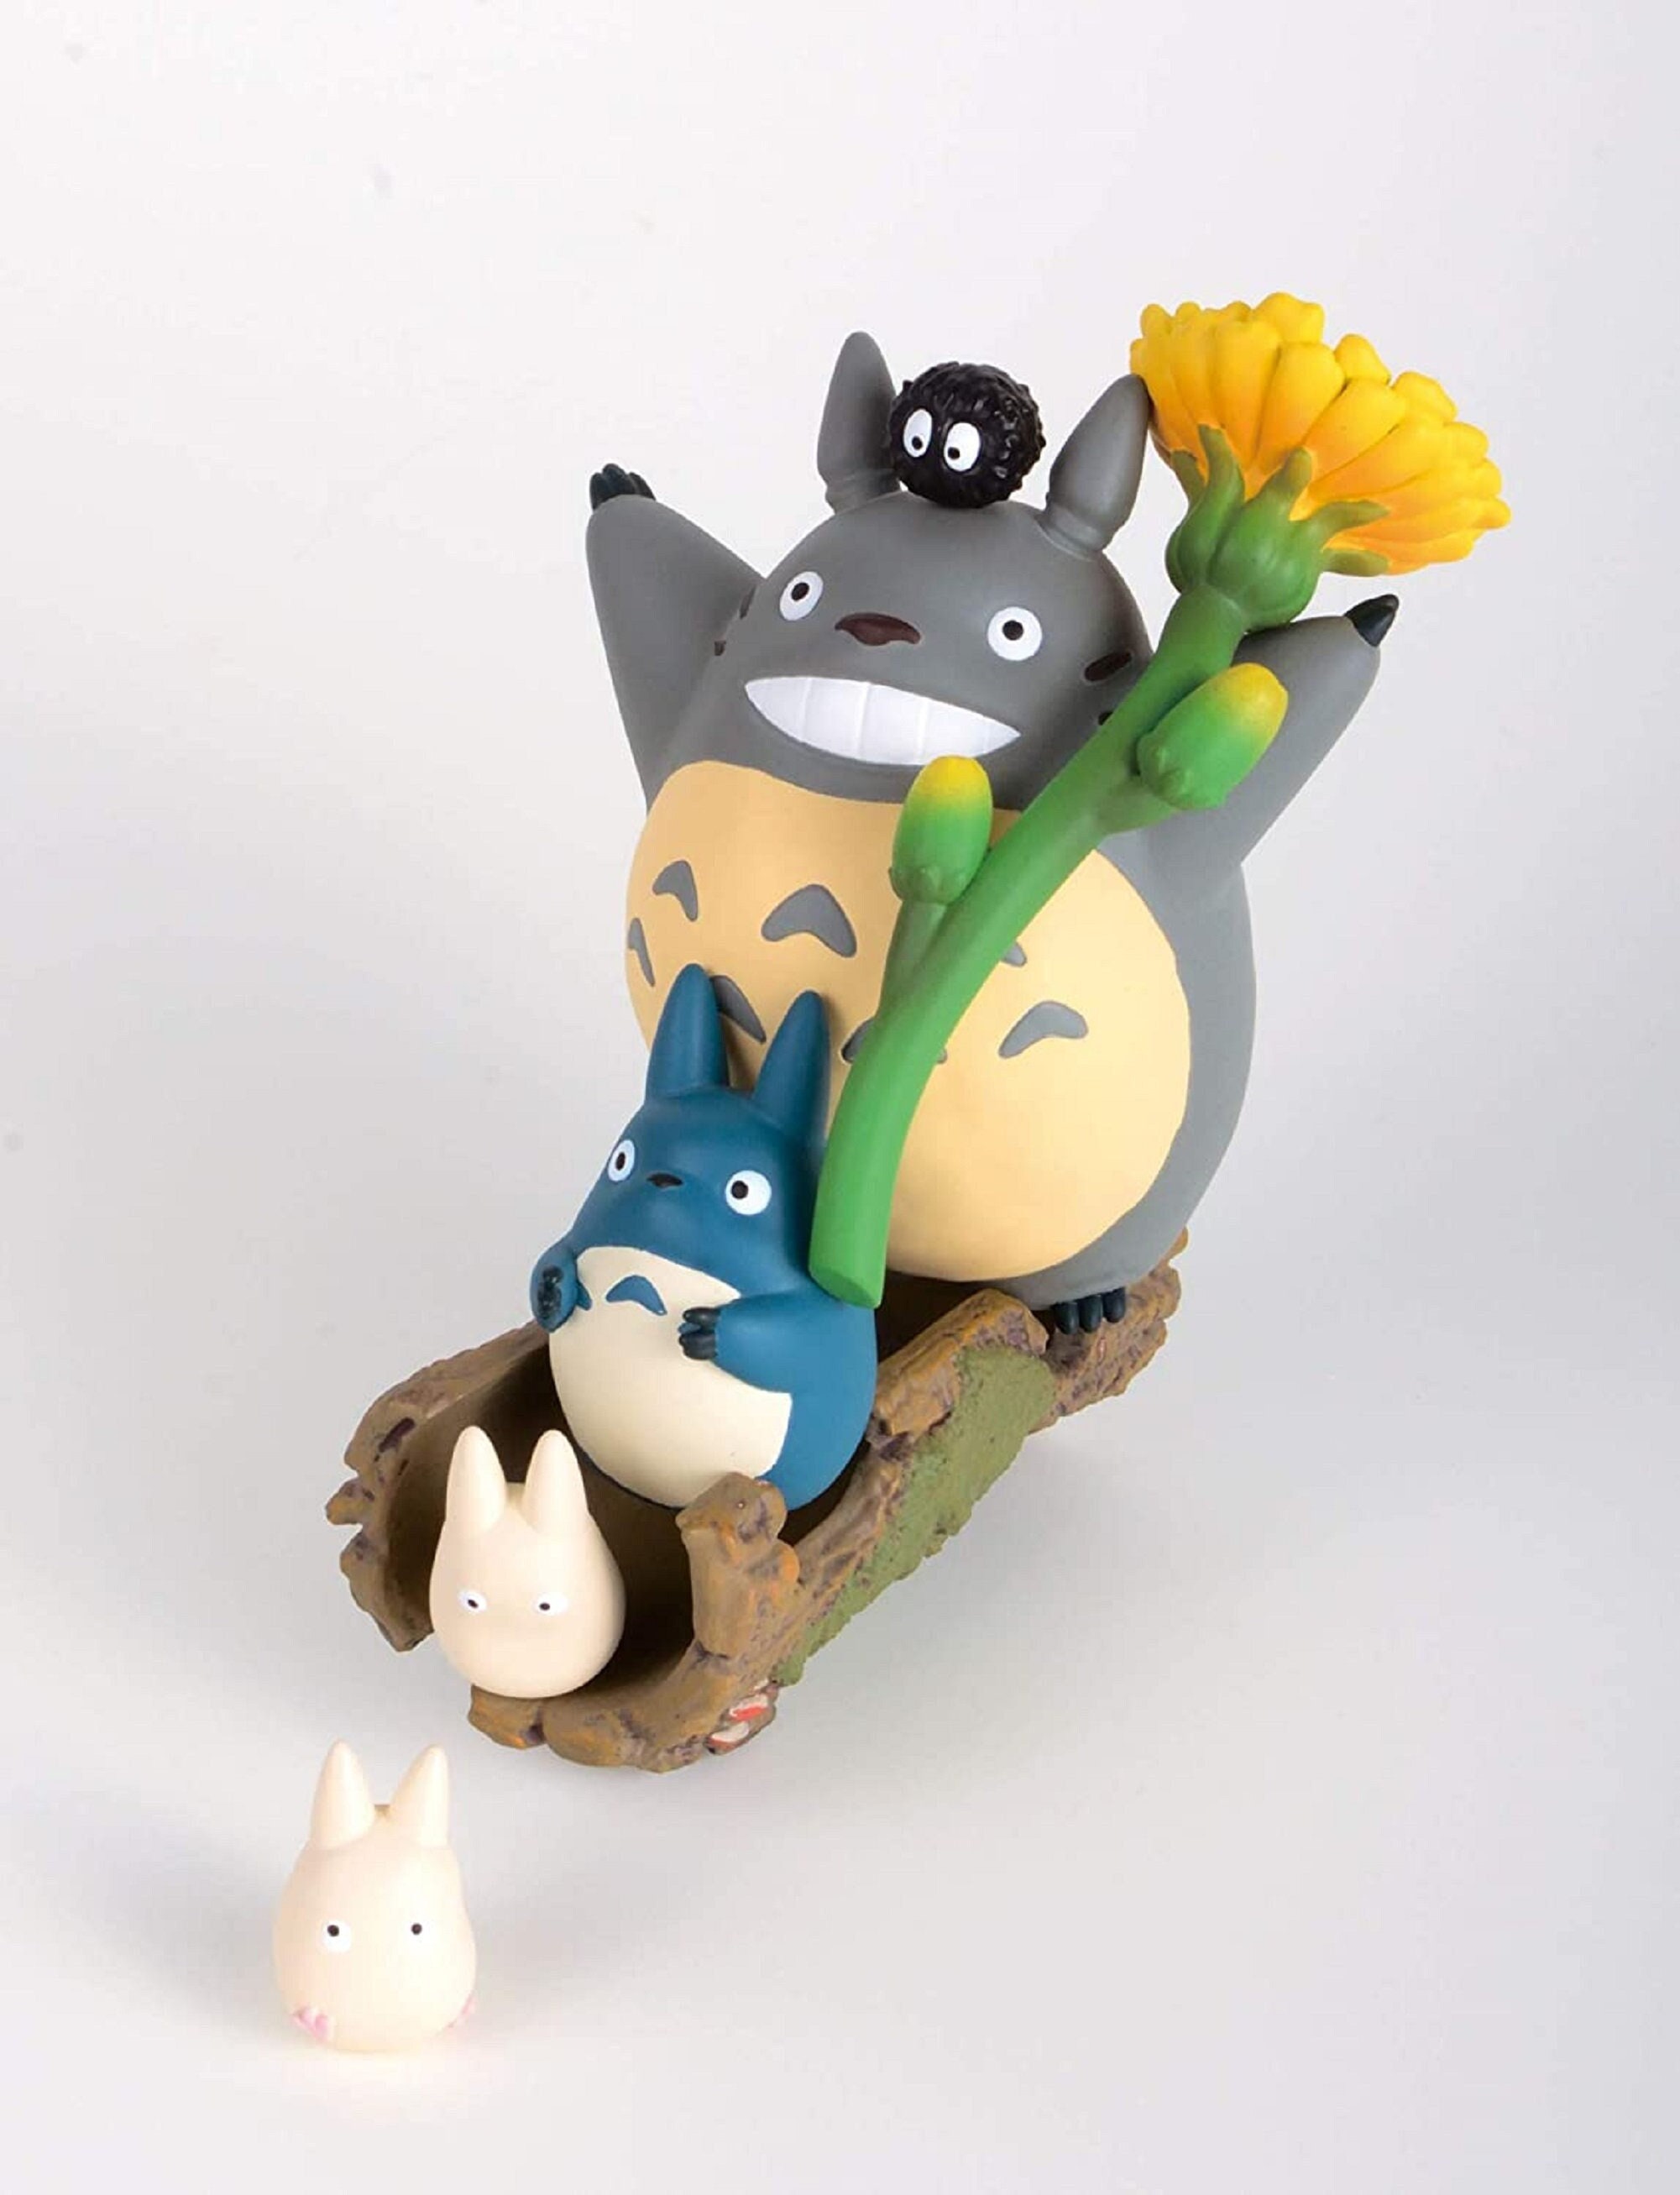 Ensky My Neighbor Totoro Nose Character Totoro And The Etsy Uk